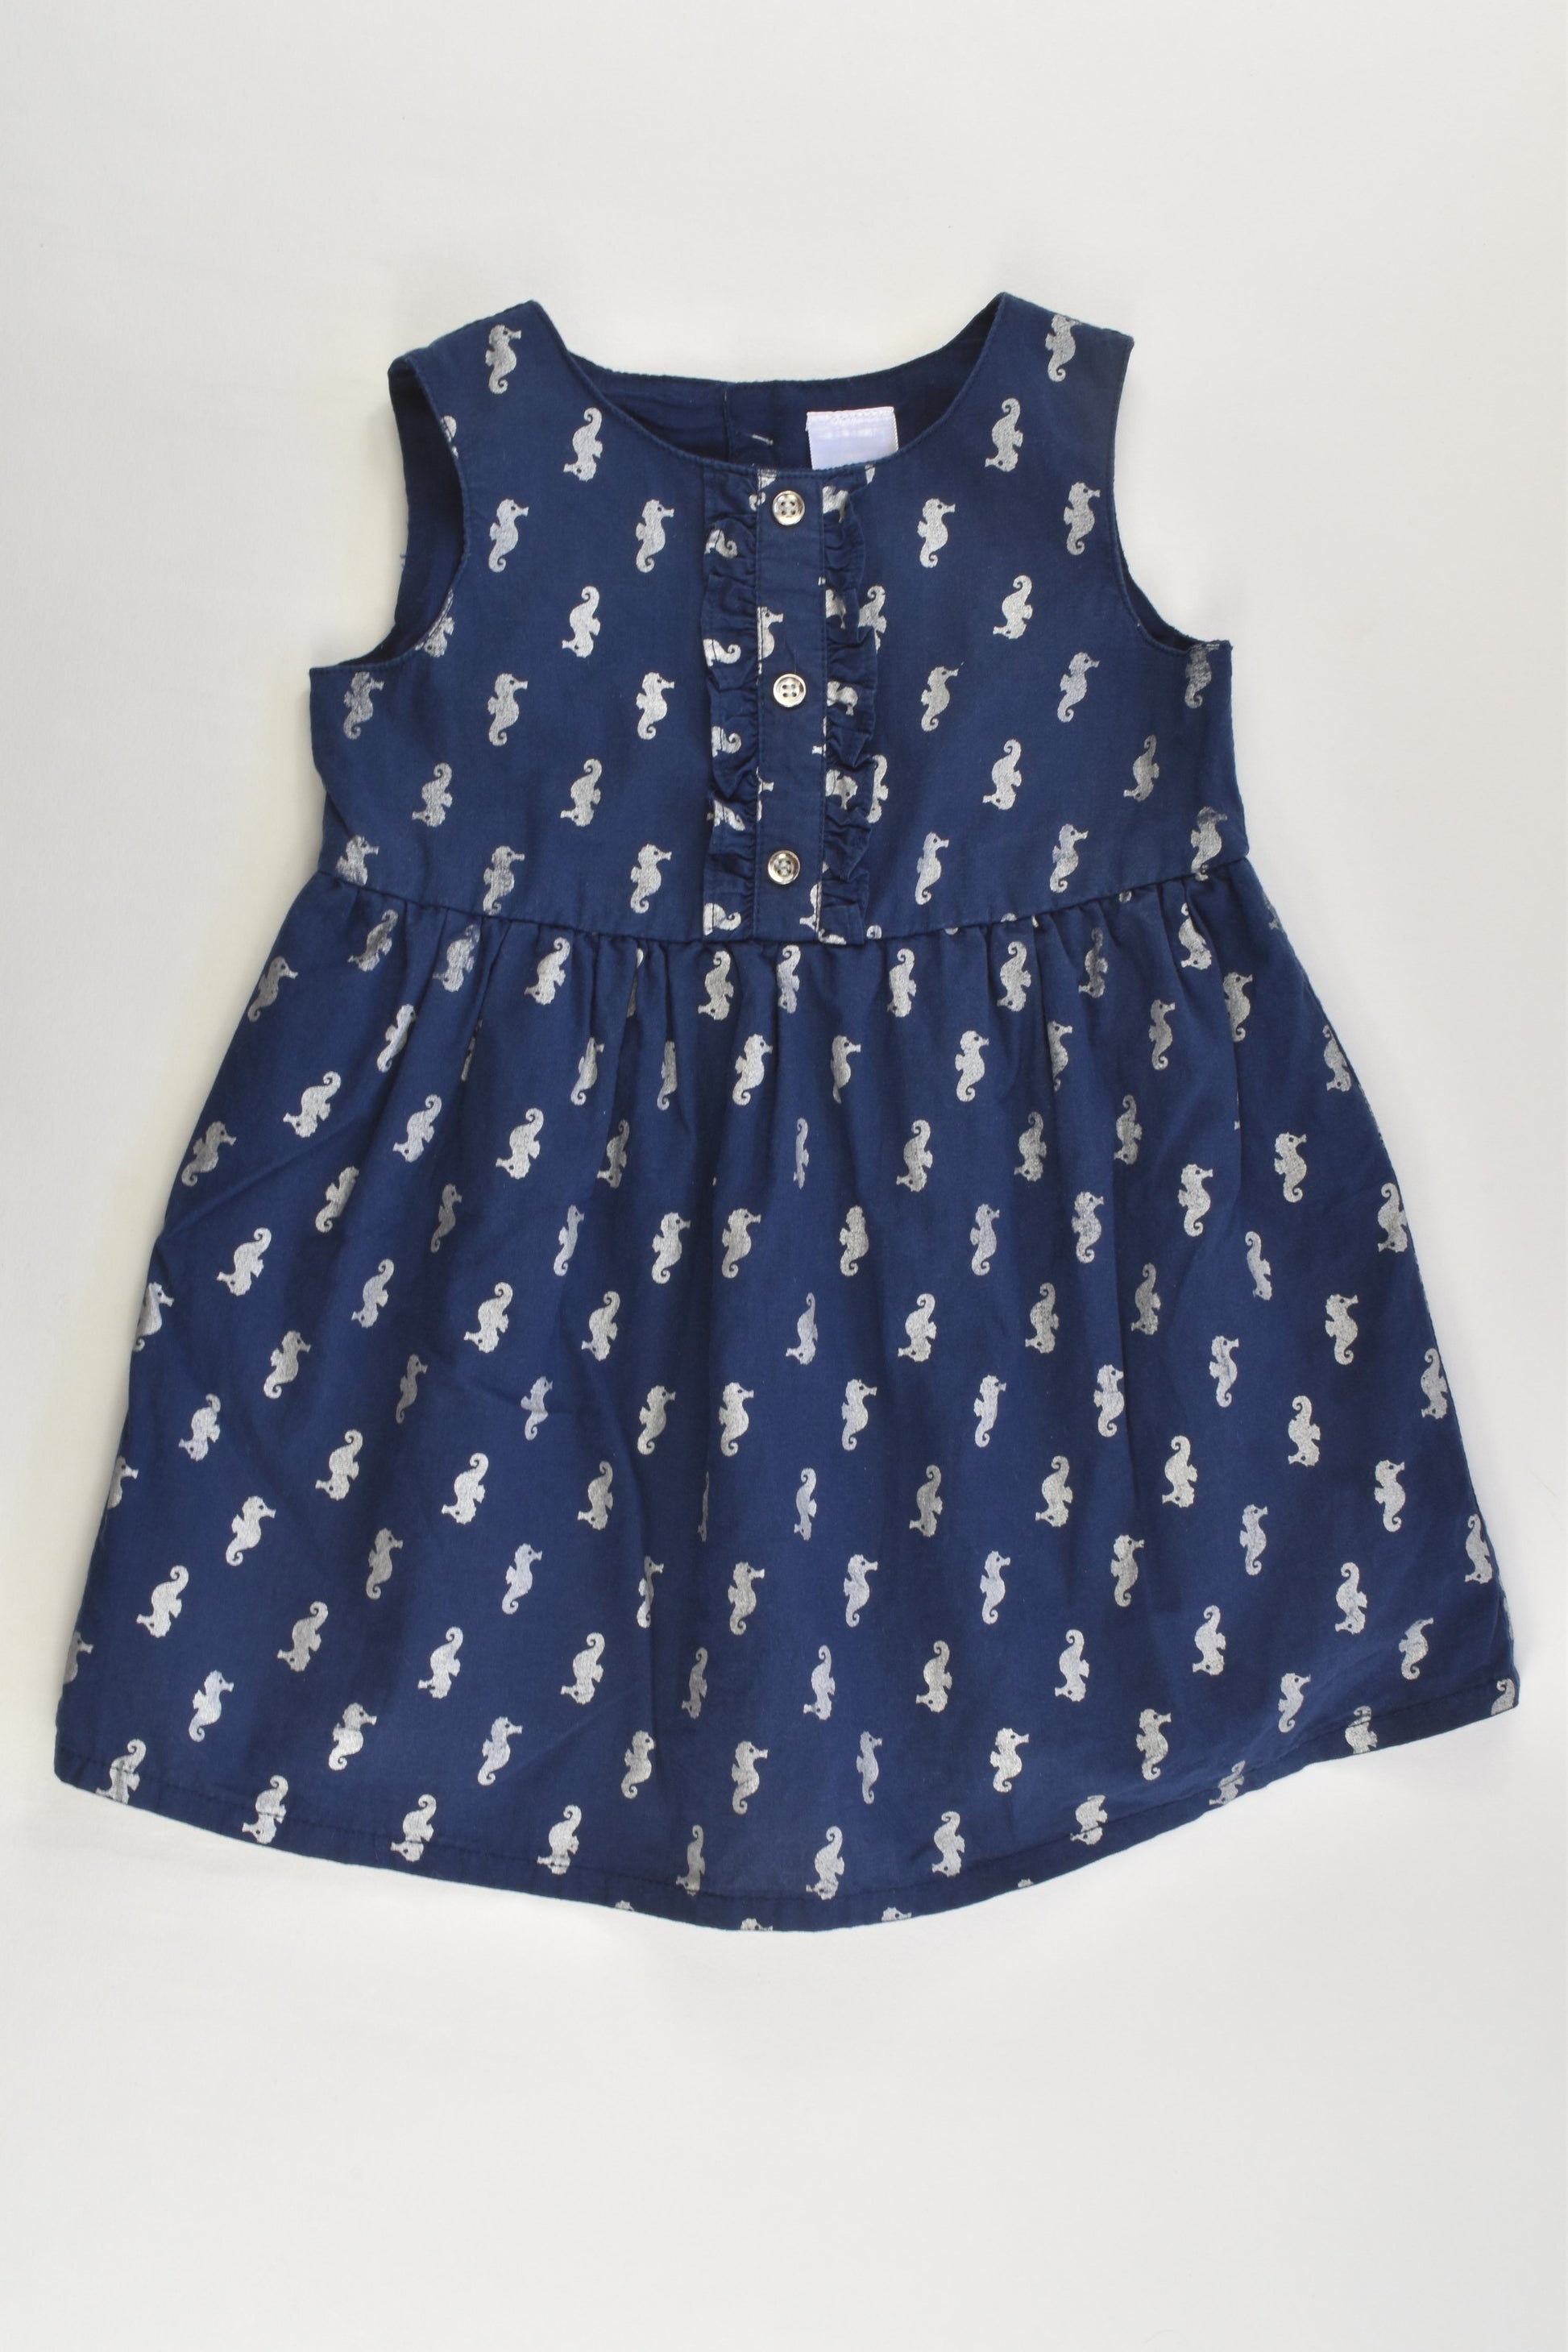 Target Size 1 Lined Seahorse Dress